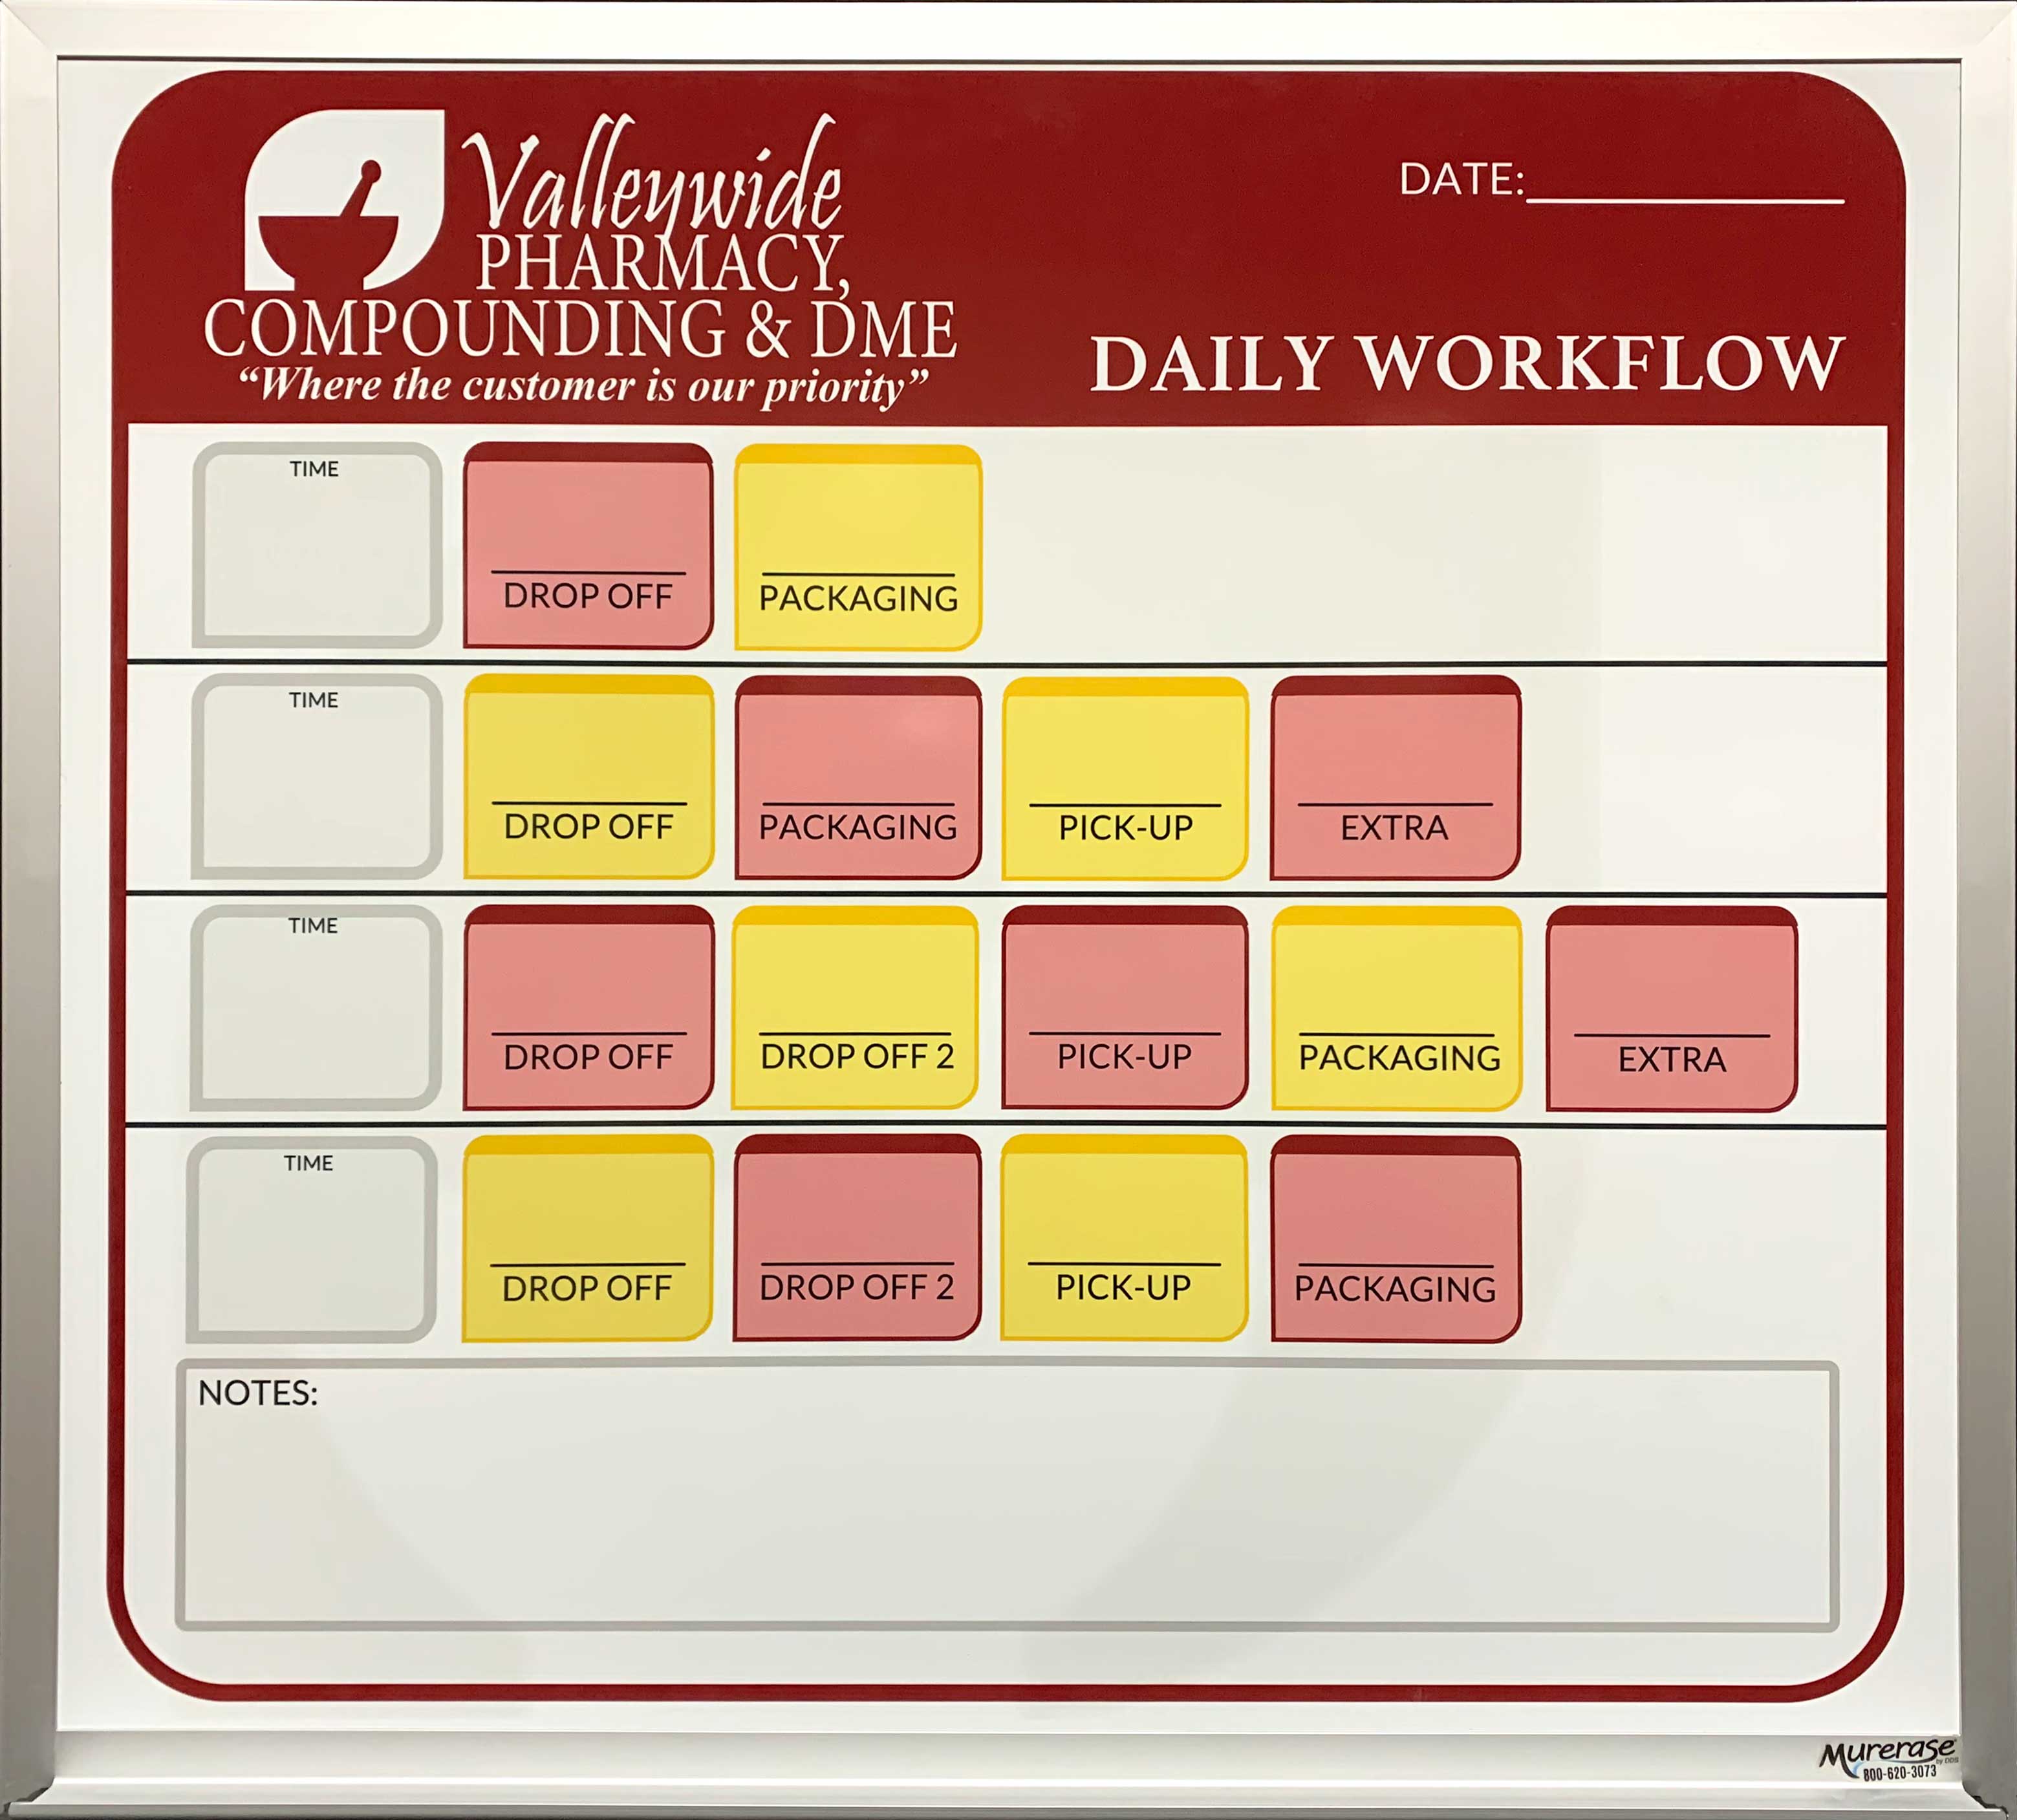 Valleywide Pharmacy Daily Workflow - magnetic 26"w x 23"h custom printed dry erase whiteboard with aluminum tray